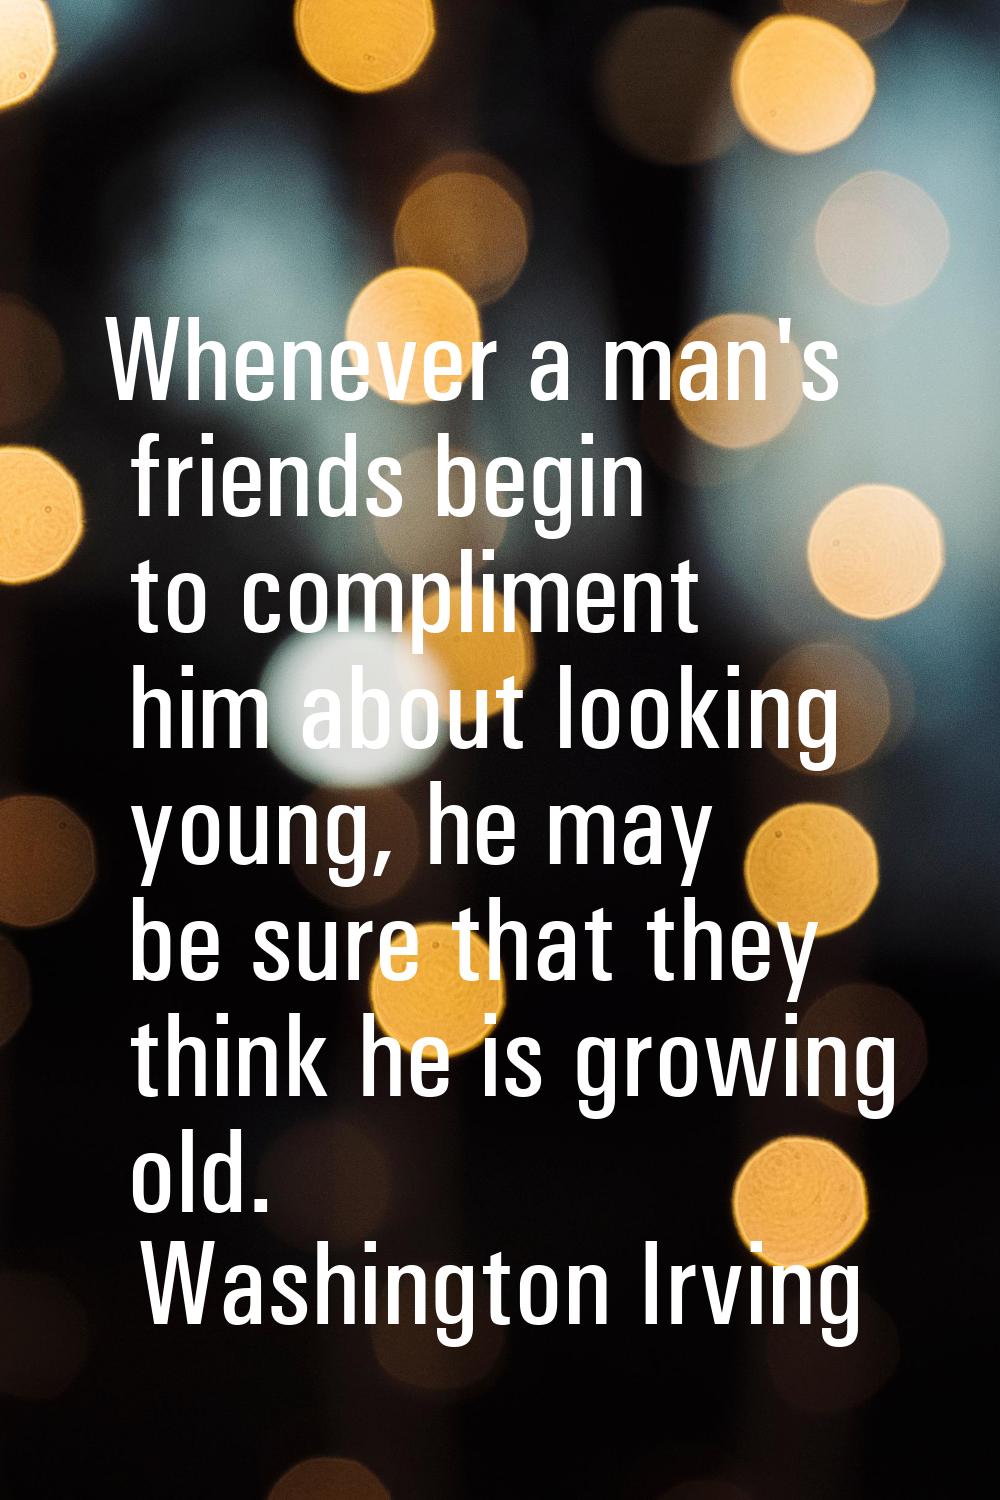 Whenever a man's friends begin to compliment him about looking young, he may be sure that they thin